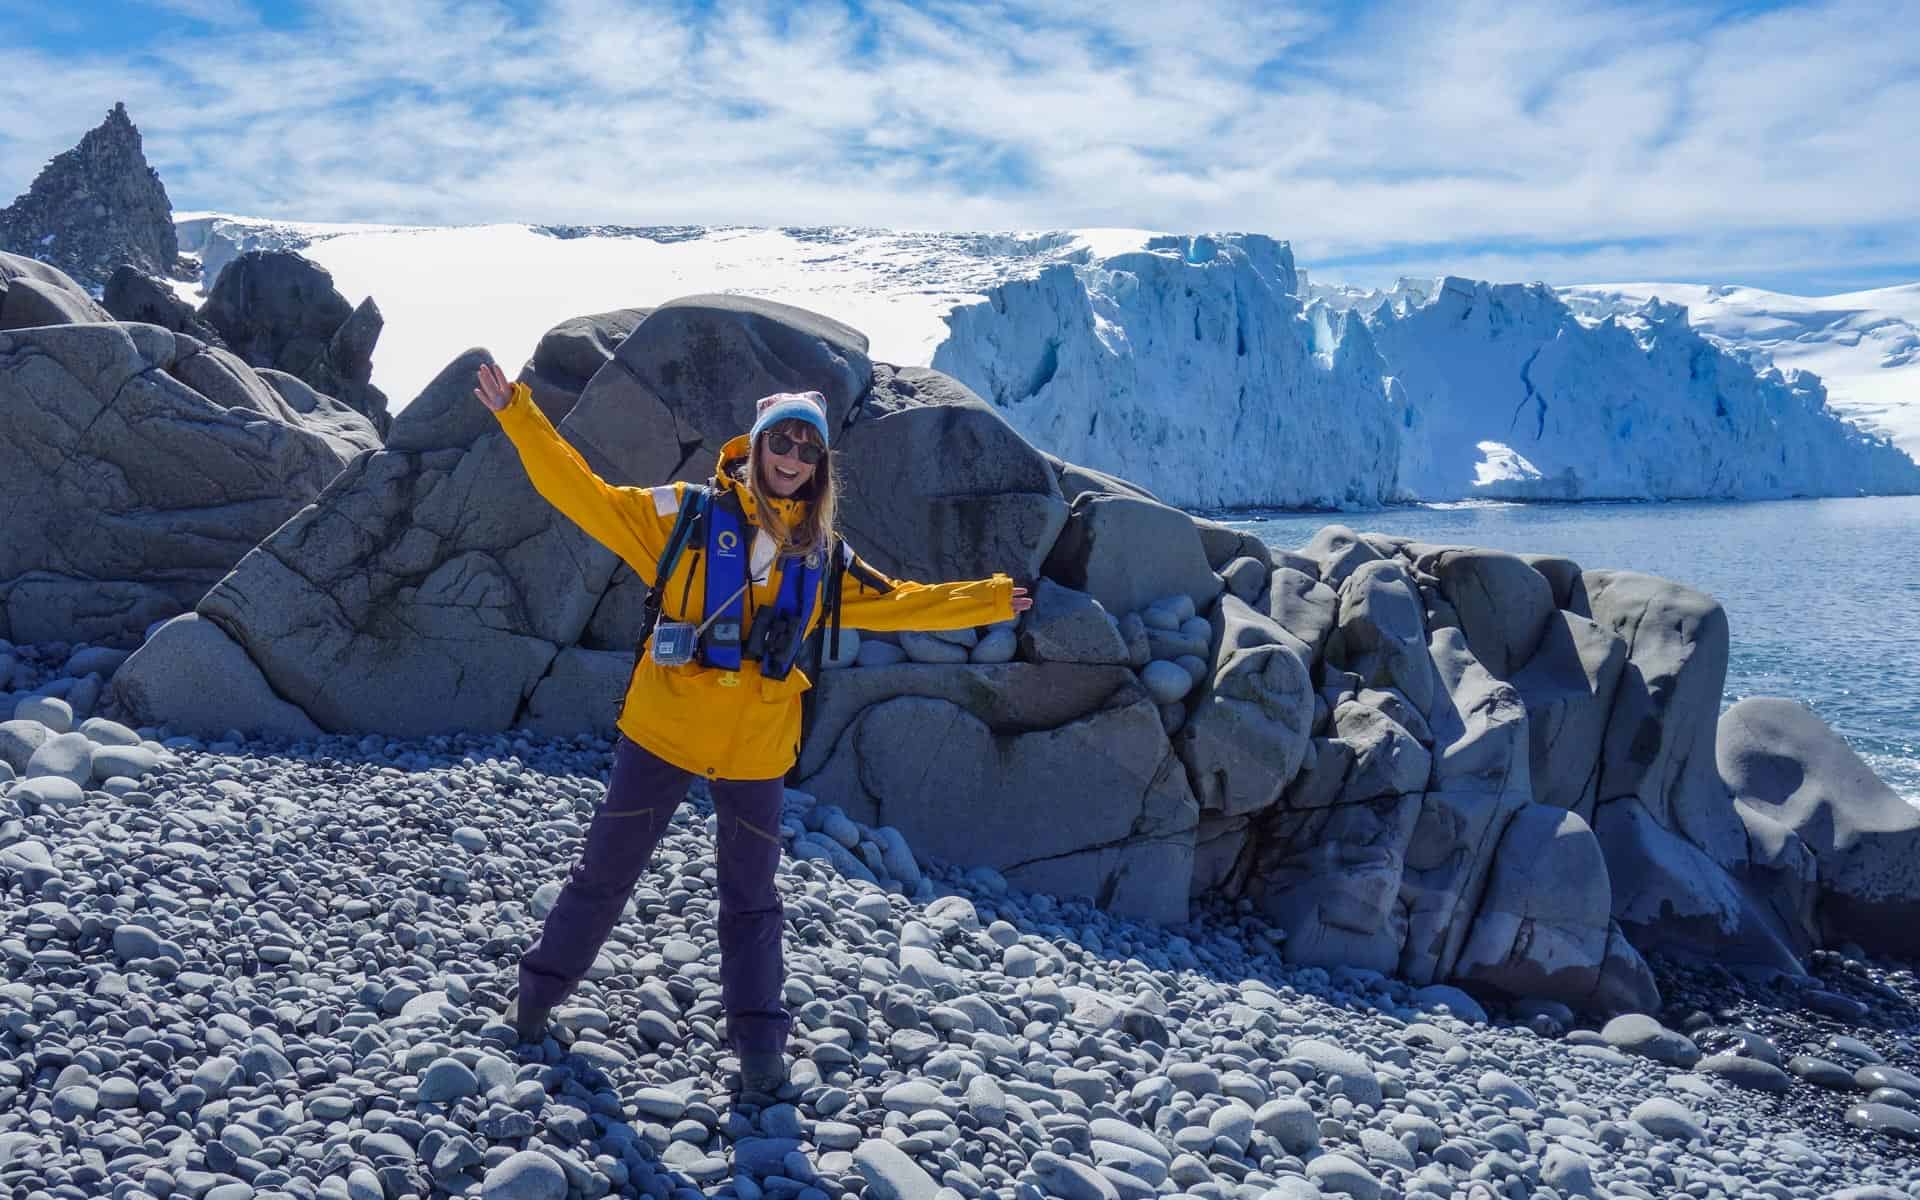 Young woman excitedly standing on a rocky beach in Antarctica with bright yellow jacket and massive icebergs behind her.